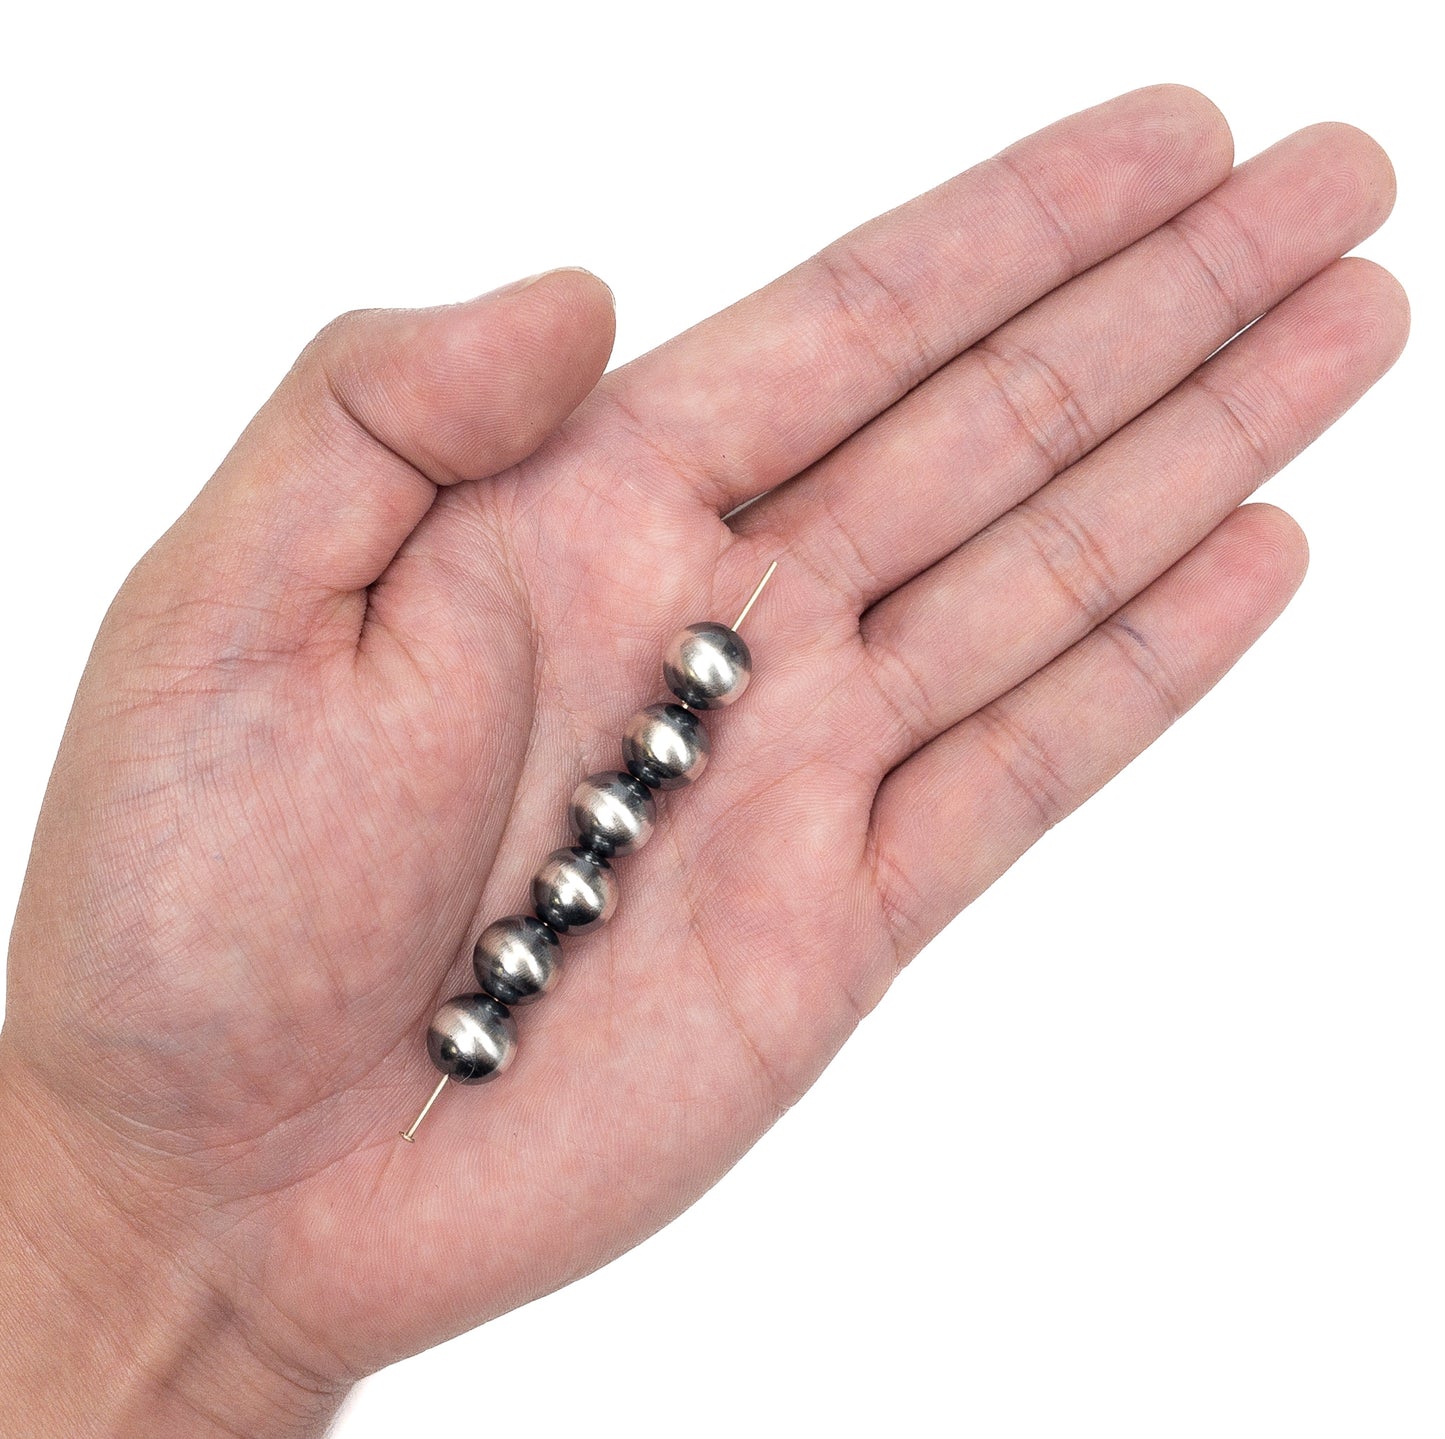 10mm Navajo Smooth Round Bead (Oxidized Sterling Silver) - 1 pc.